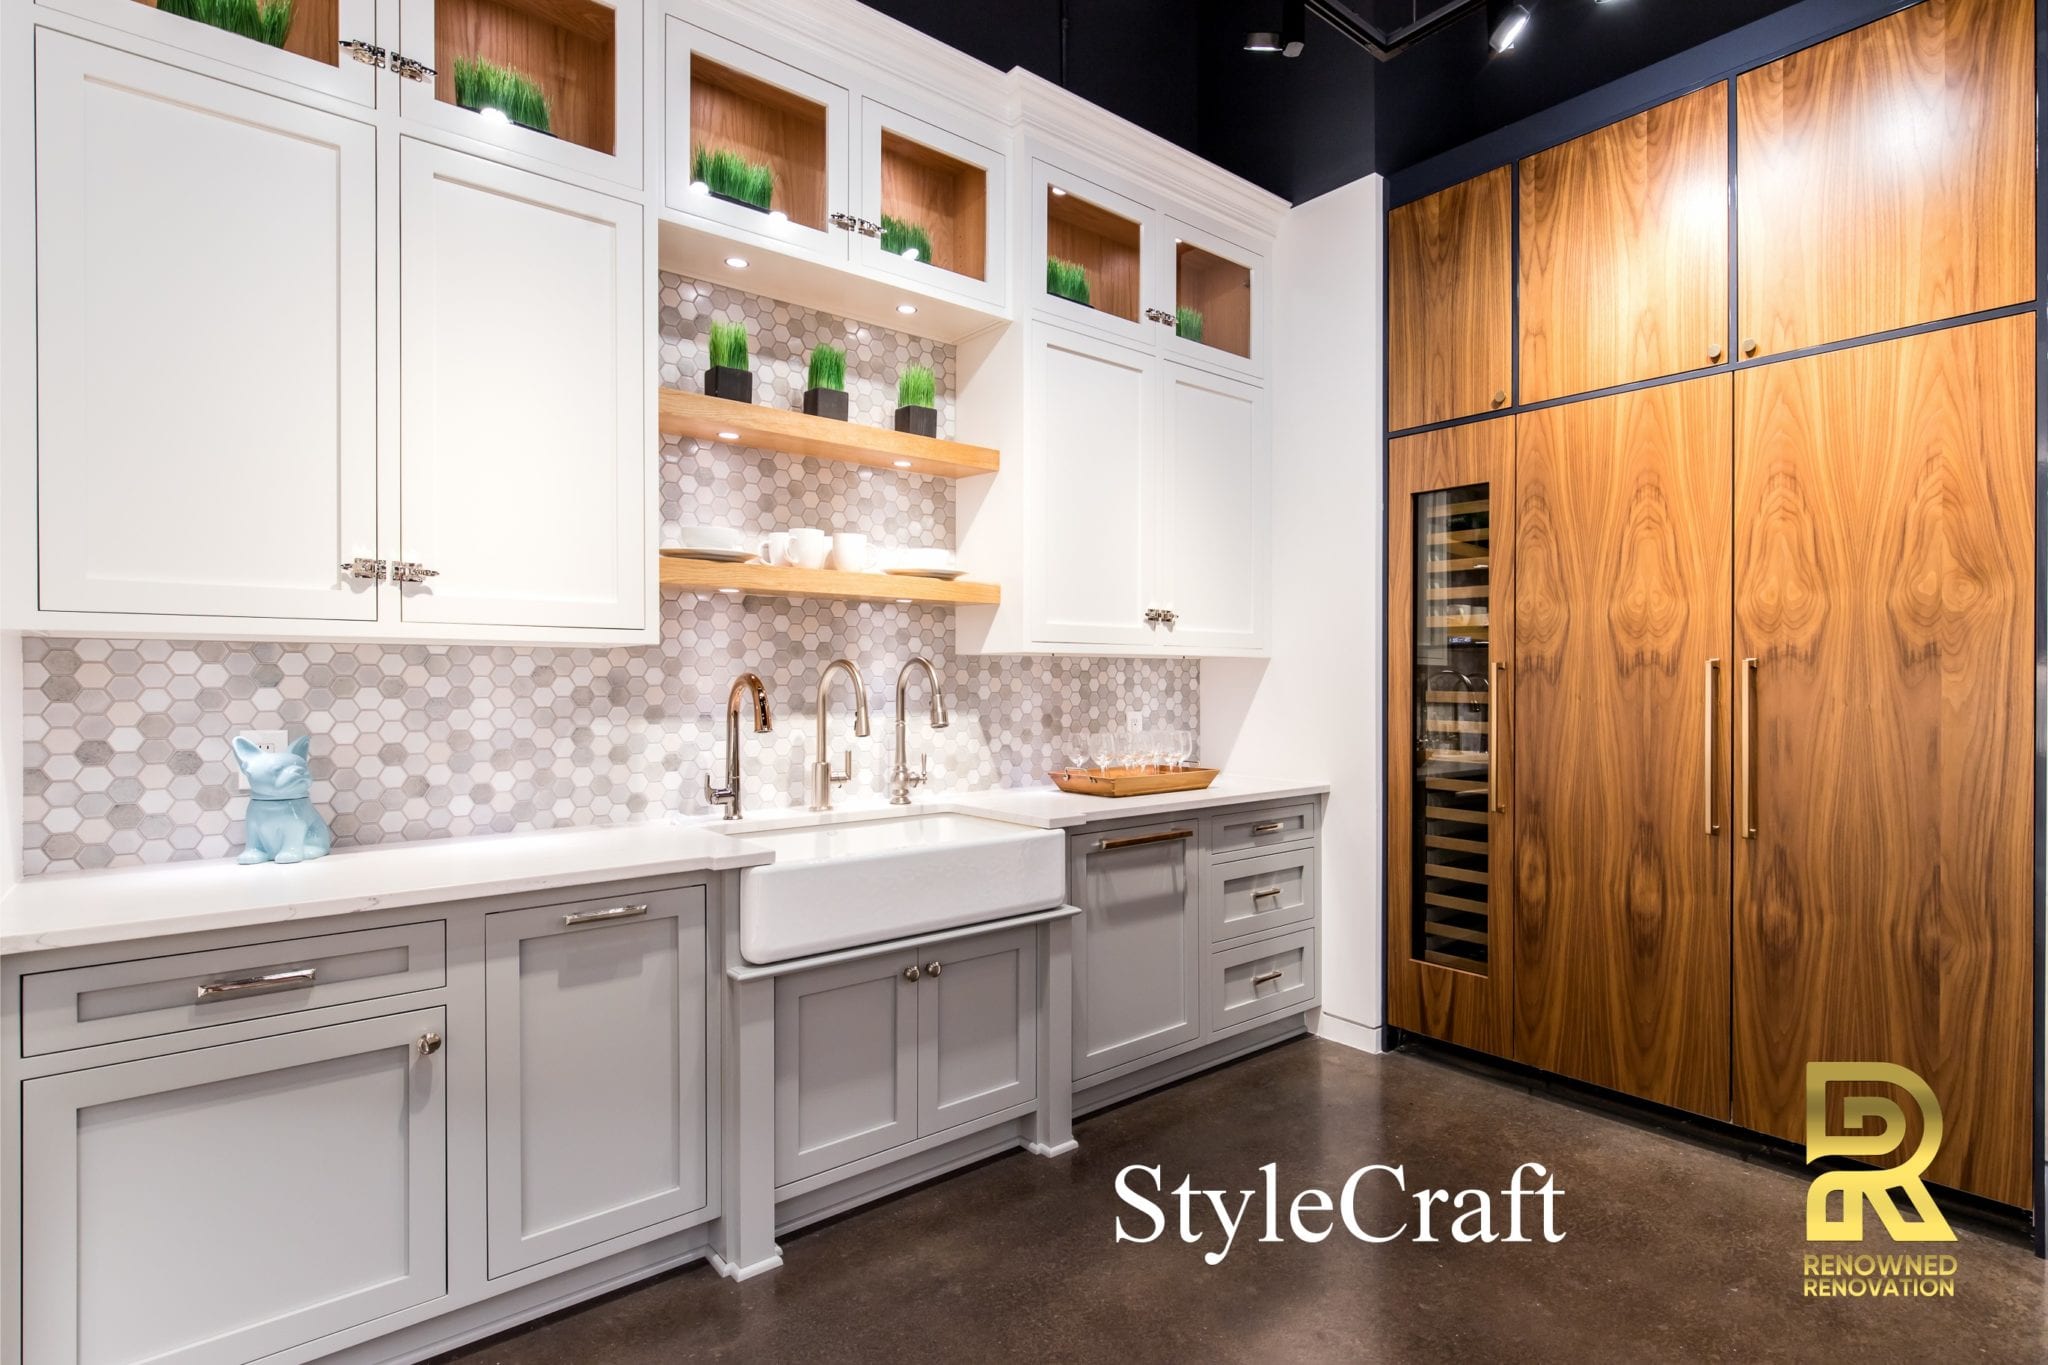 Kohler Signature Store Dallas StyleCraft Cabinets by Renowned Renovation